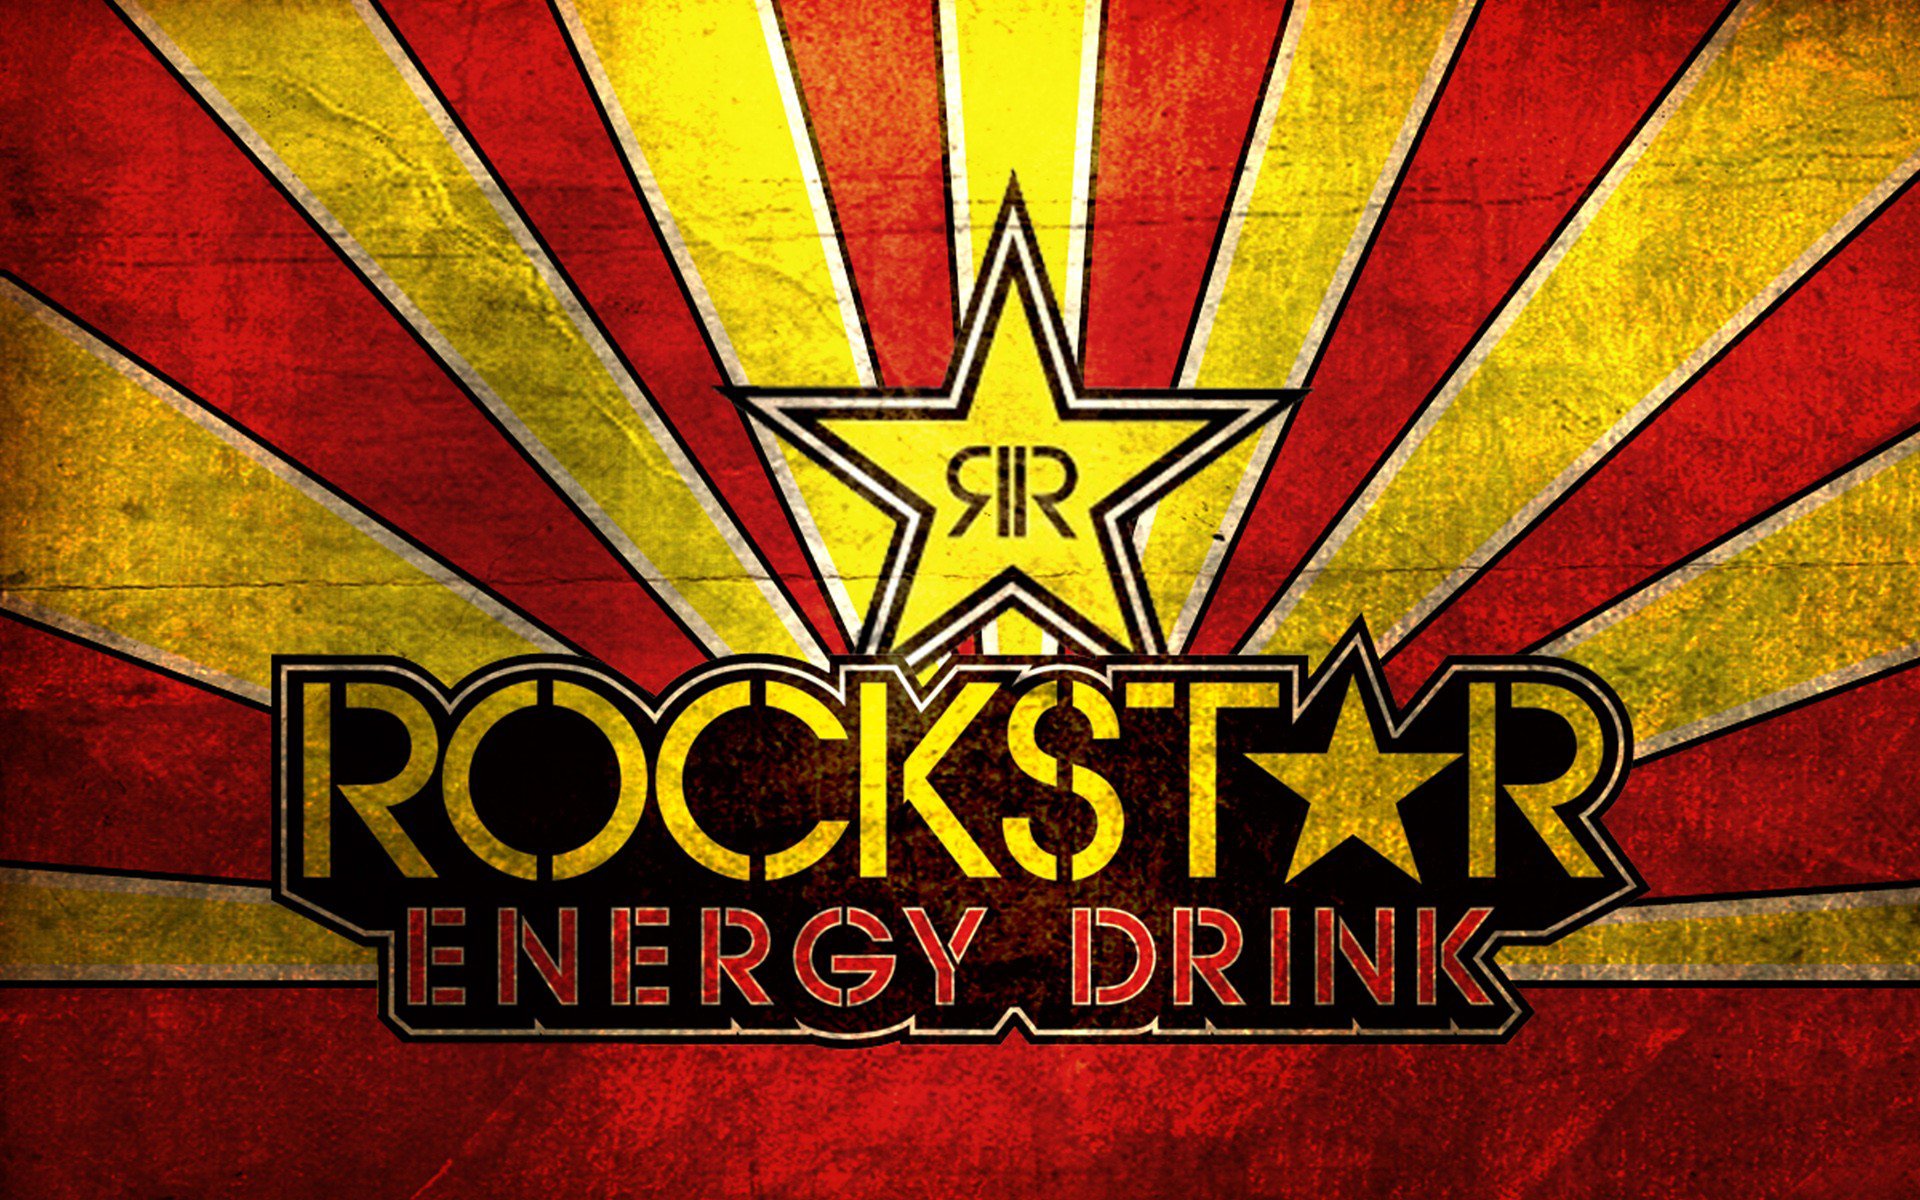 rockstar energy drink vector art hd - | Images And Wallpapers - all free to download